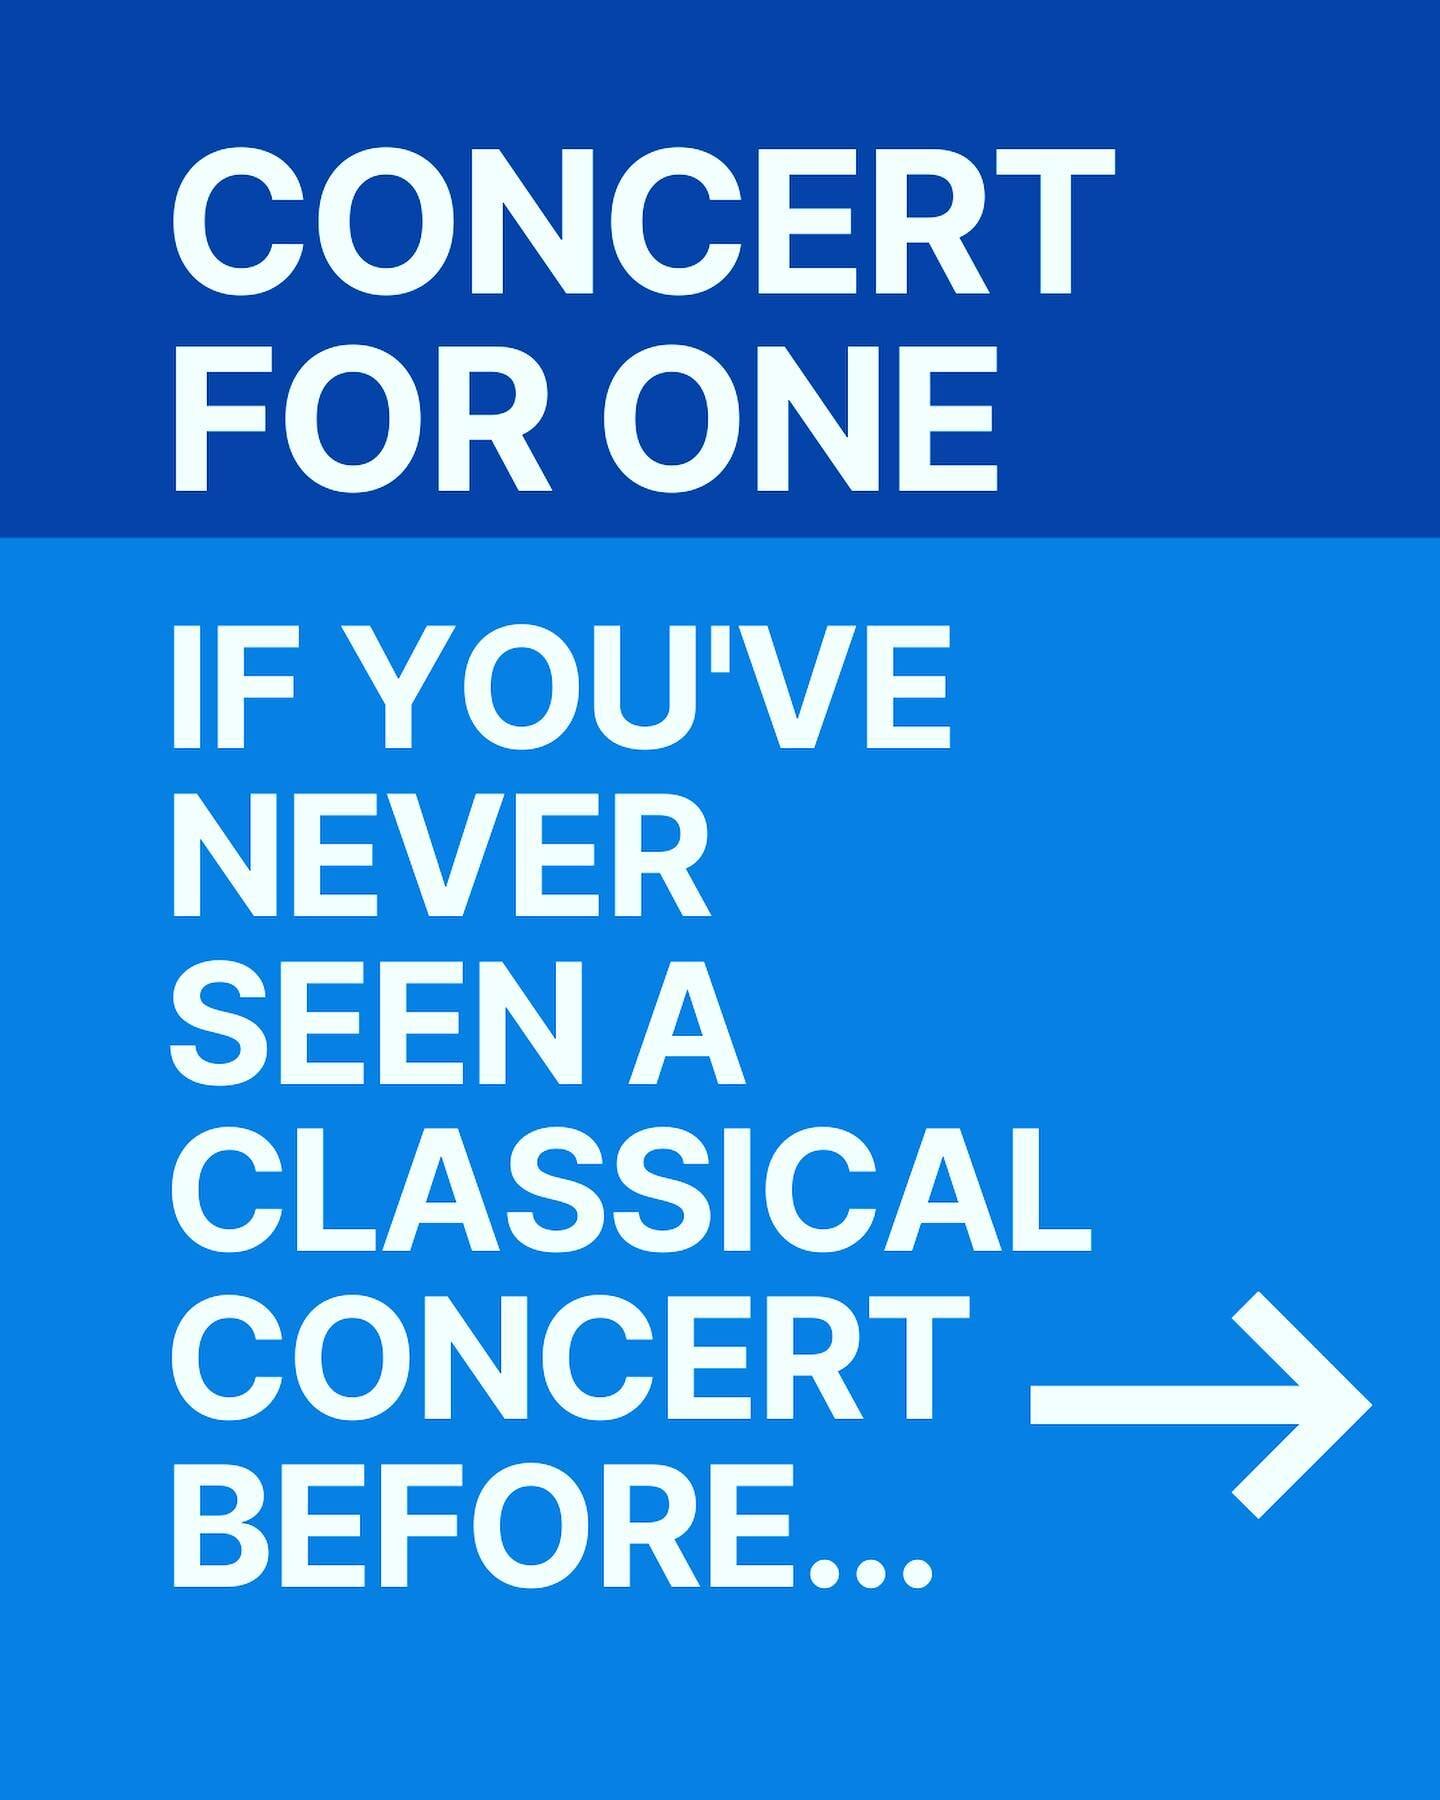 Always wanted to see a classical music concert but never had the chance? Have you felt intimidated by the bougie culture and the weird etiquette? Yeah, makes sense. That&rsquo;s why we created &ldquo;Concert for One,&rdquo; an opportunity for folx wh